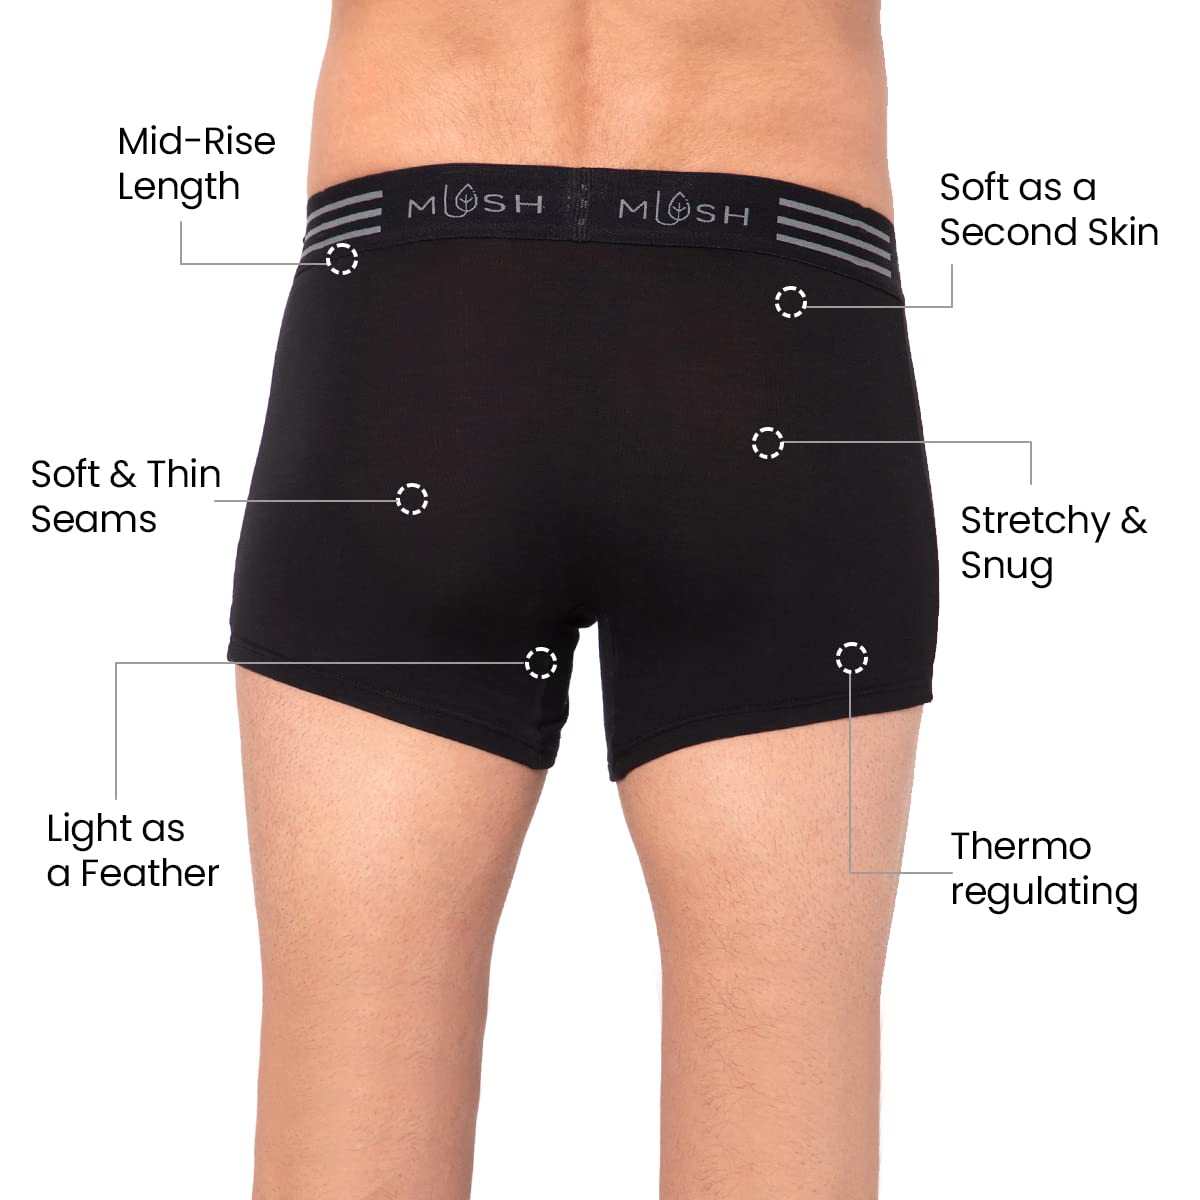 Mush Ultra Soft, Breathable, Feather Light Men's Bamboo Trunk || Naturally Anti-Odor and Anti-Microbial Bamboo Innerwear (XL, Black)